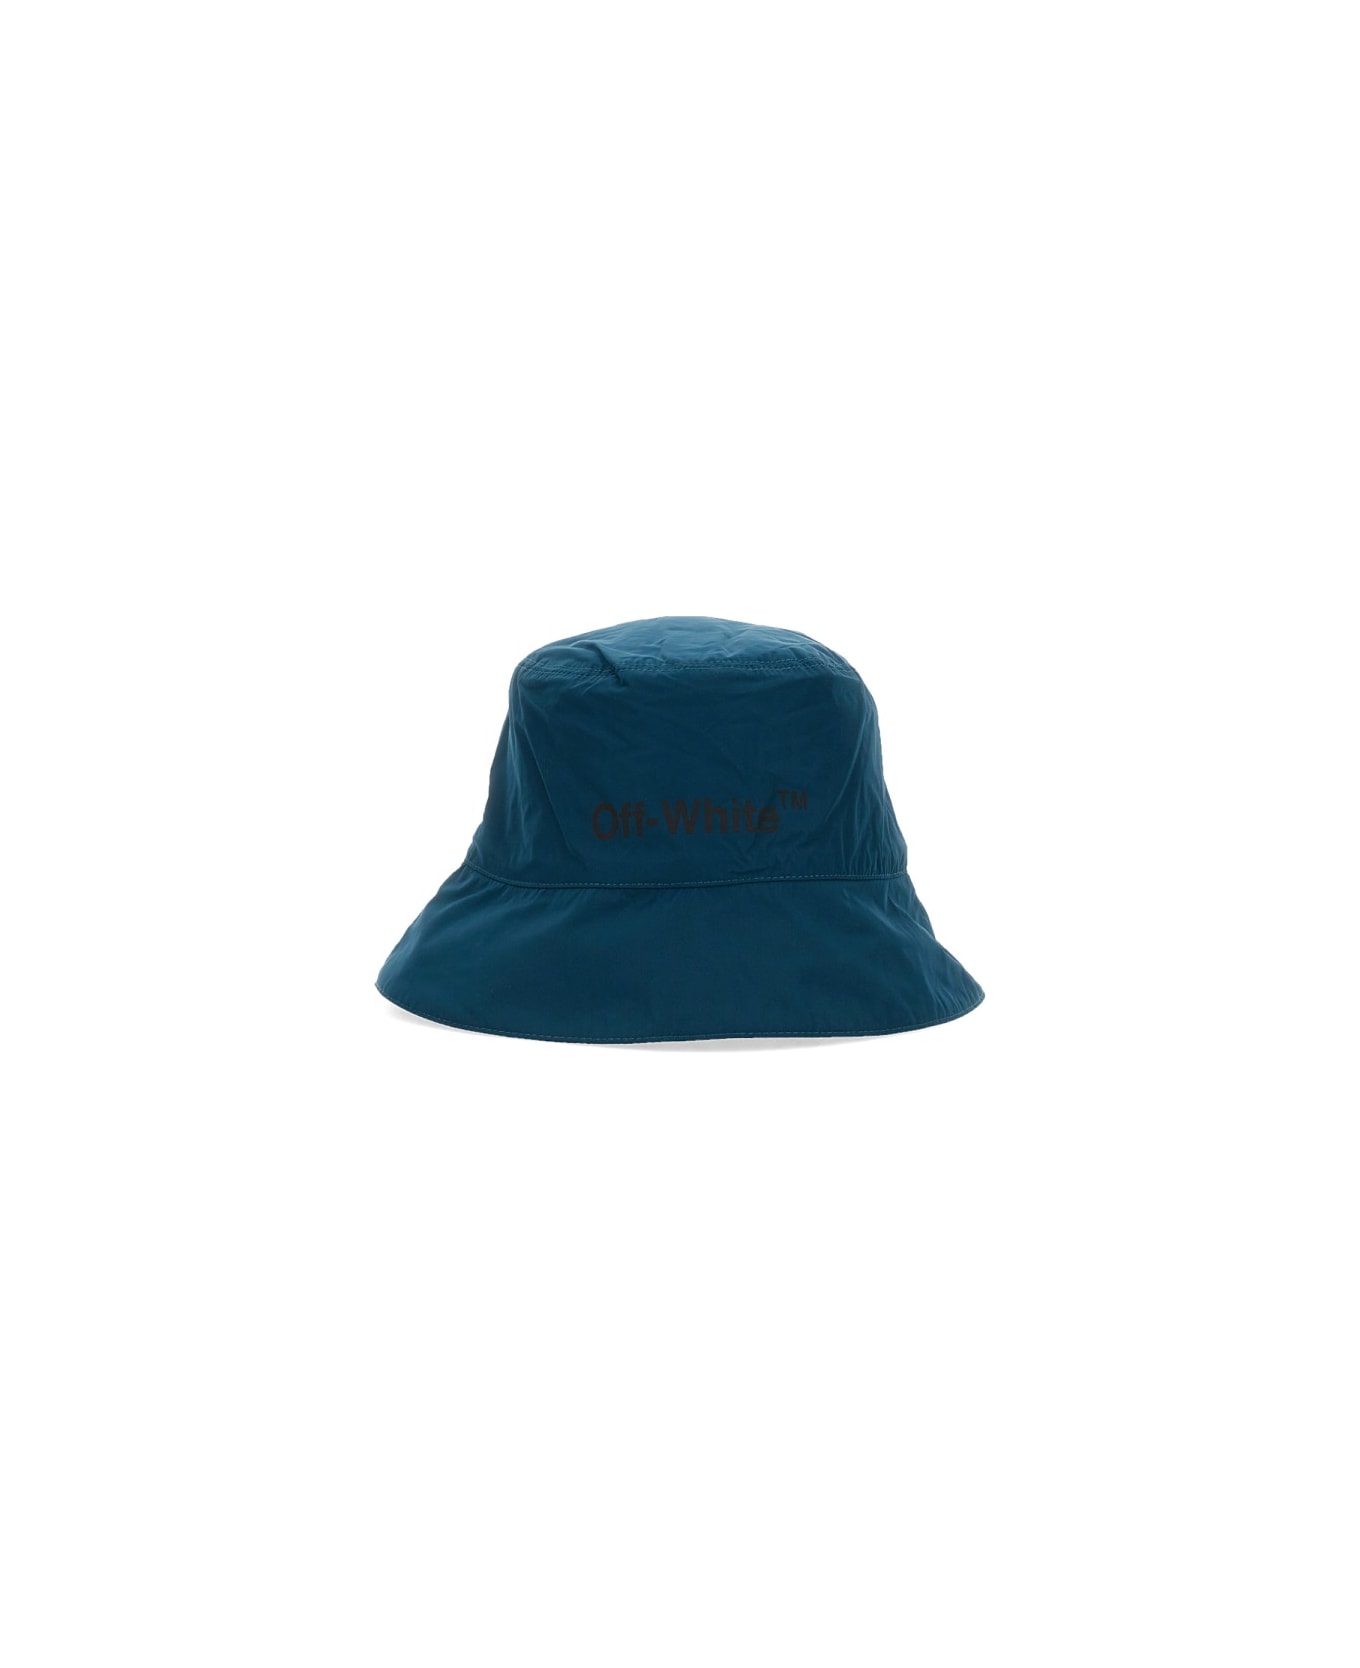 Off-White Bucket Hat With Logo - BLUE 帽子